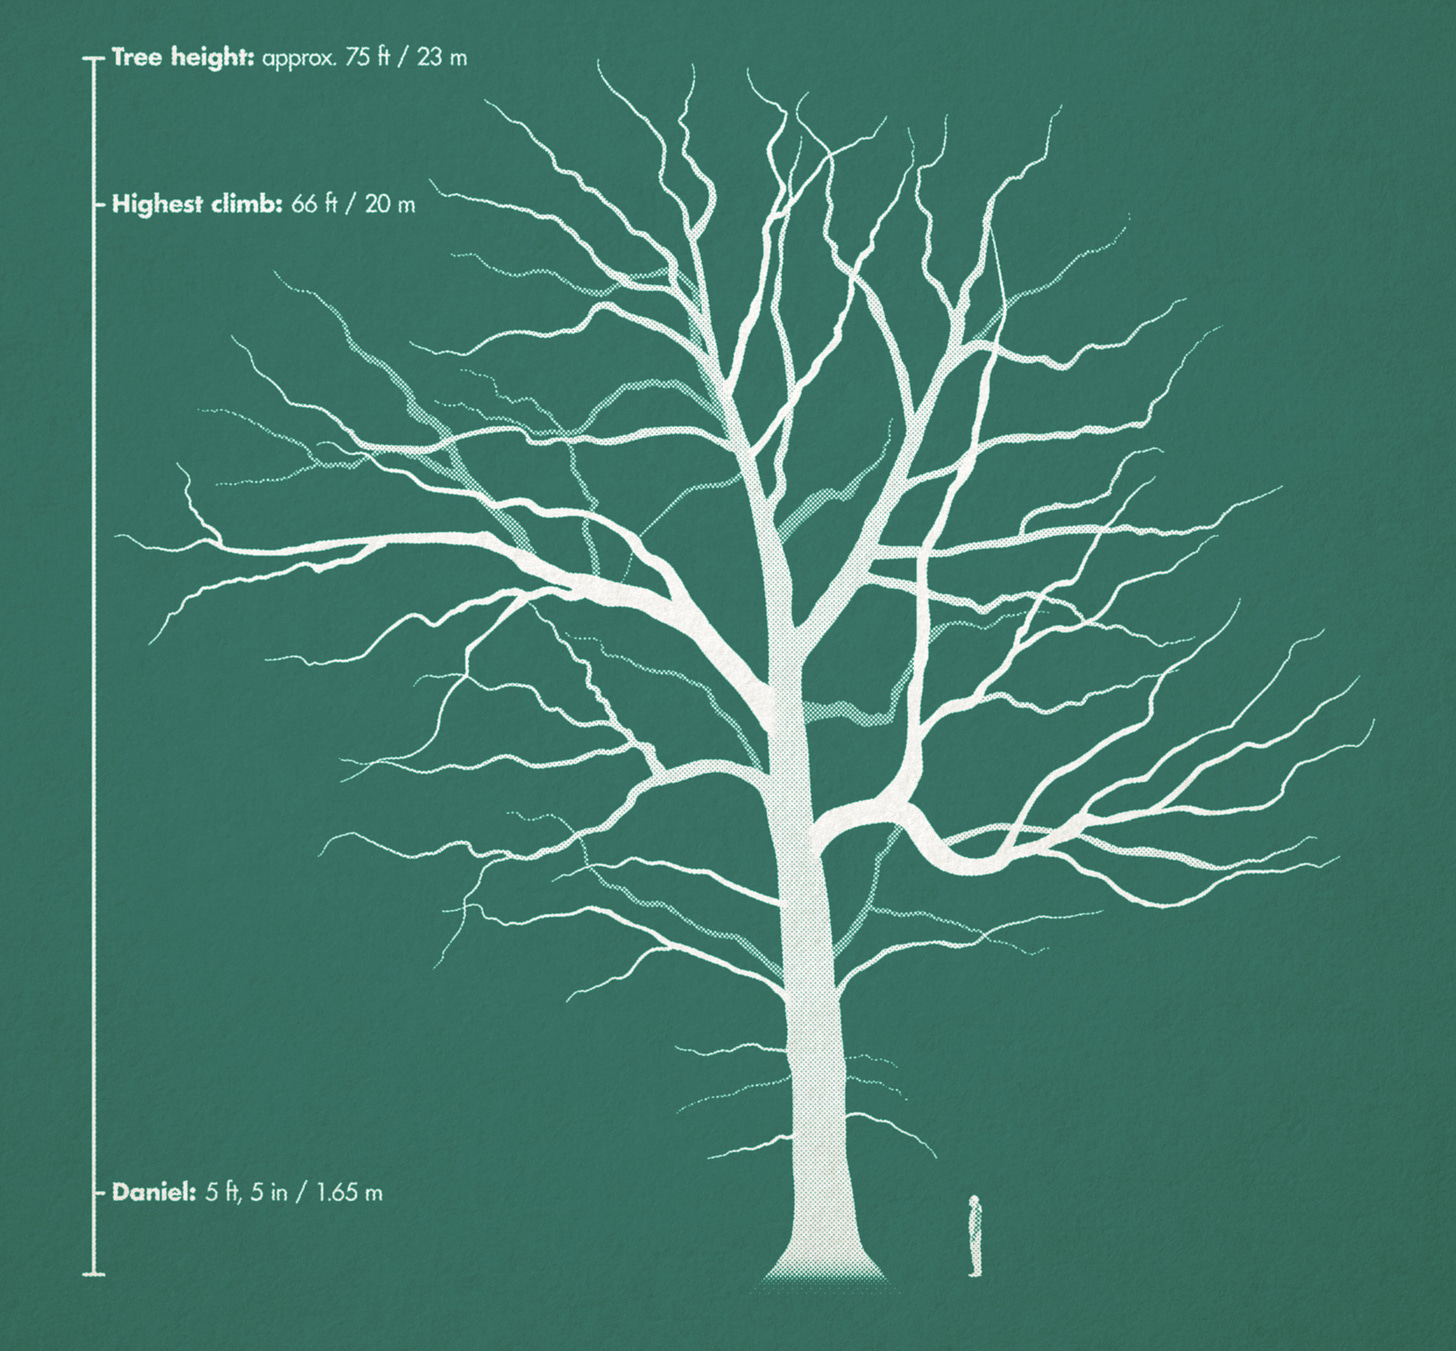 A diagram of the burr oak's branches, and its size compared to the author's